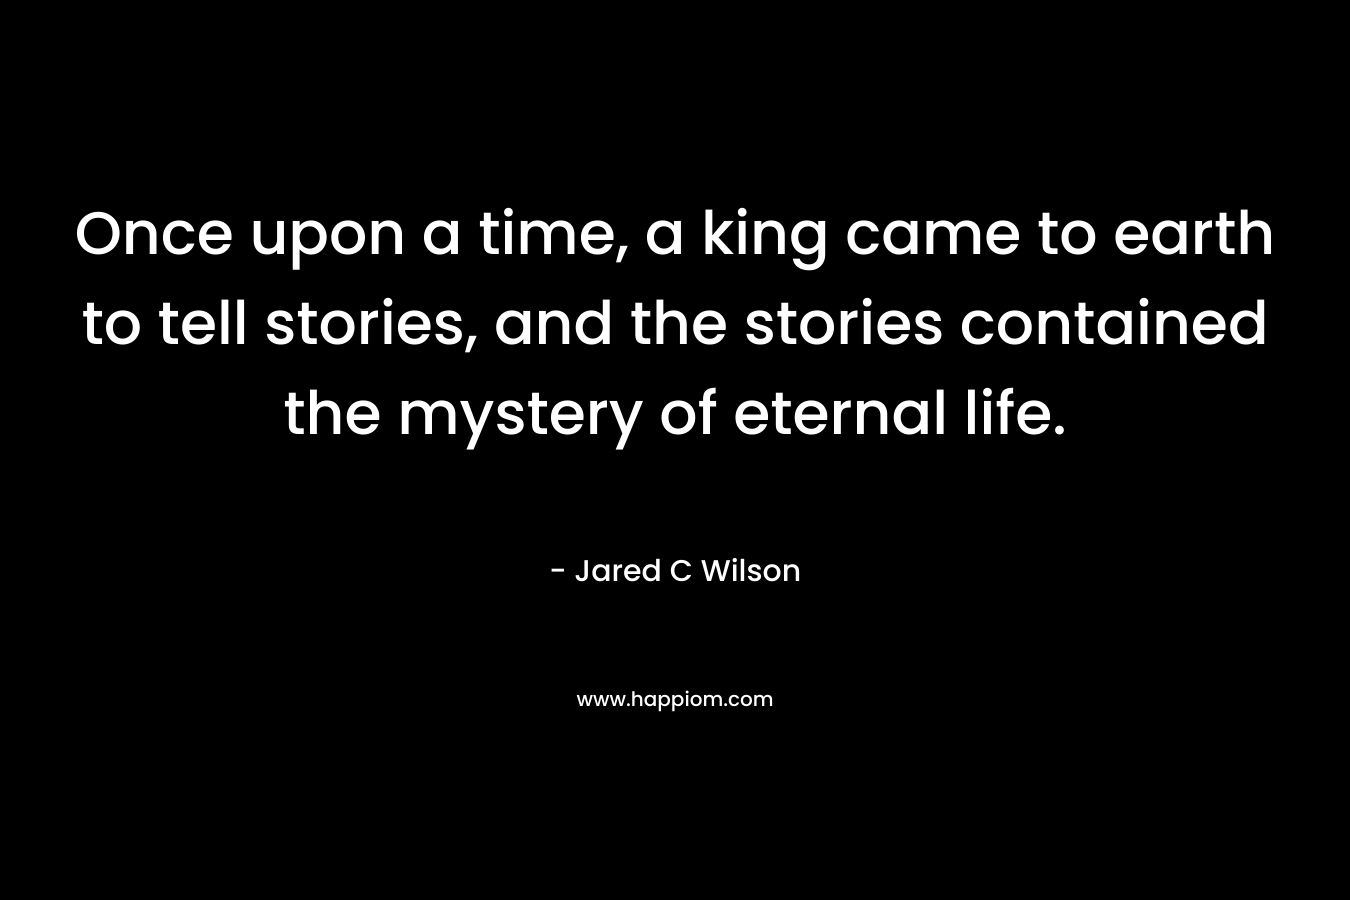 Once upon a time, a king came to earth to tell stories, and the stories contained the mystery of eternal life.